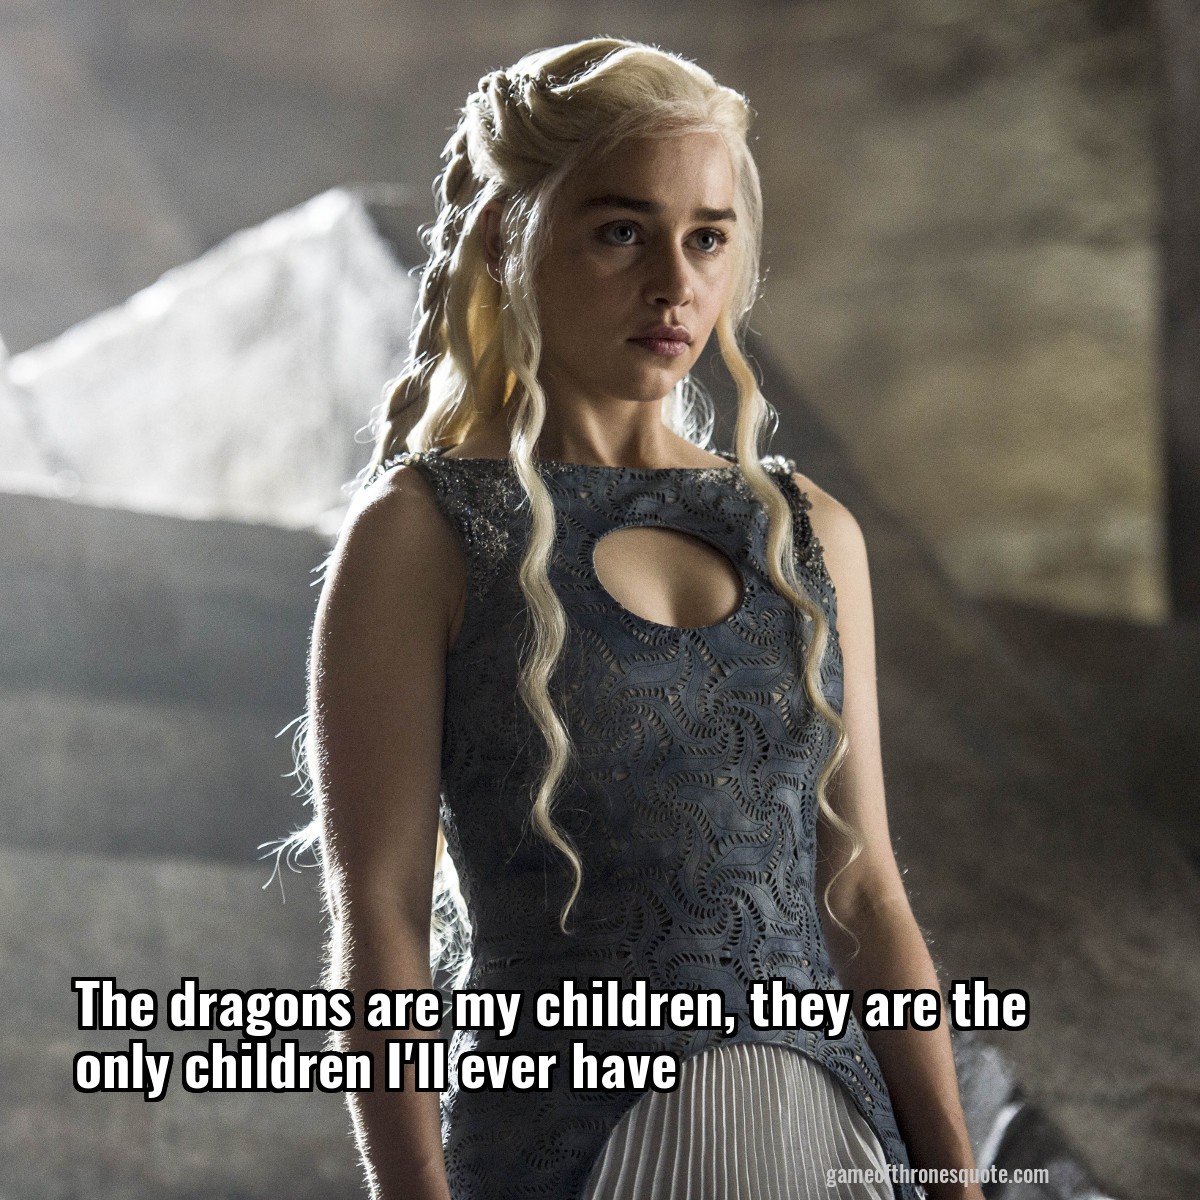 The dragons are my children, they are the only children I'll ever have